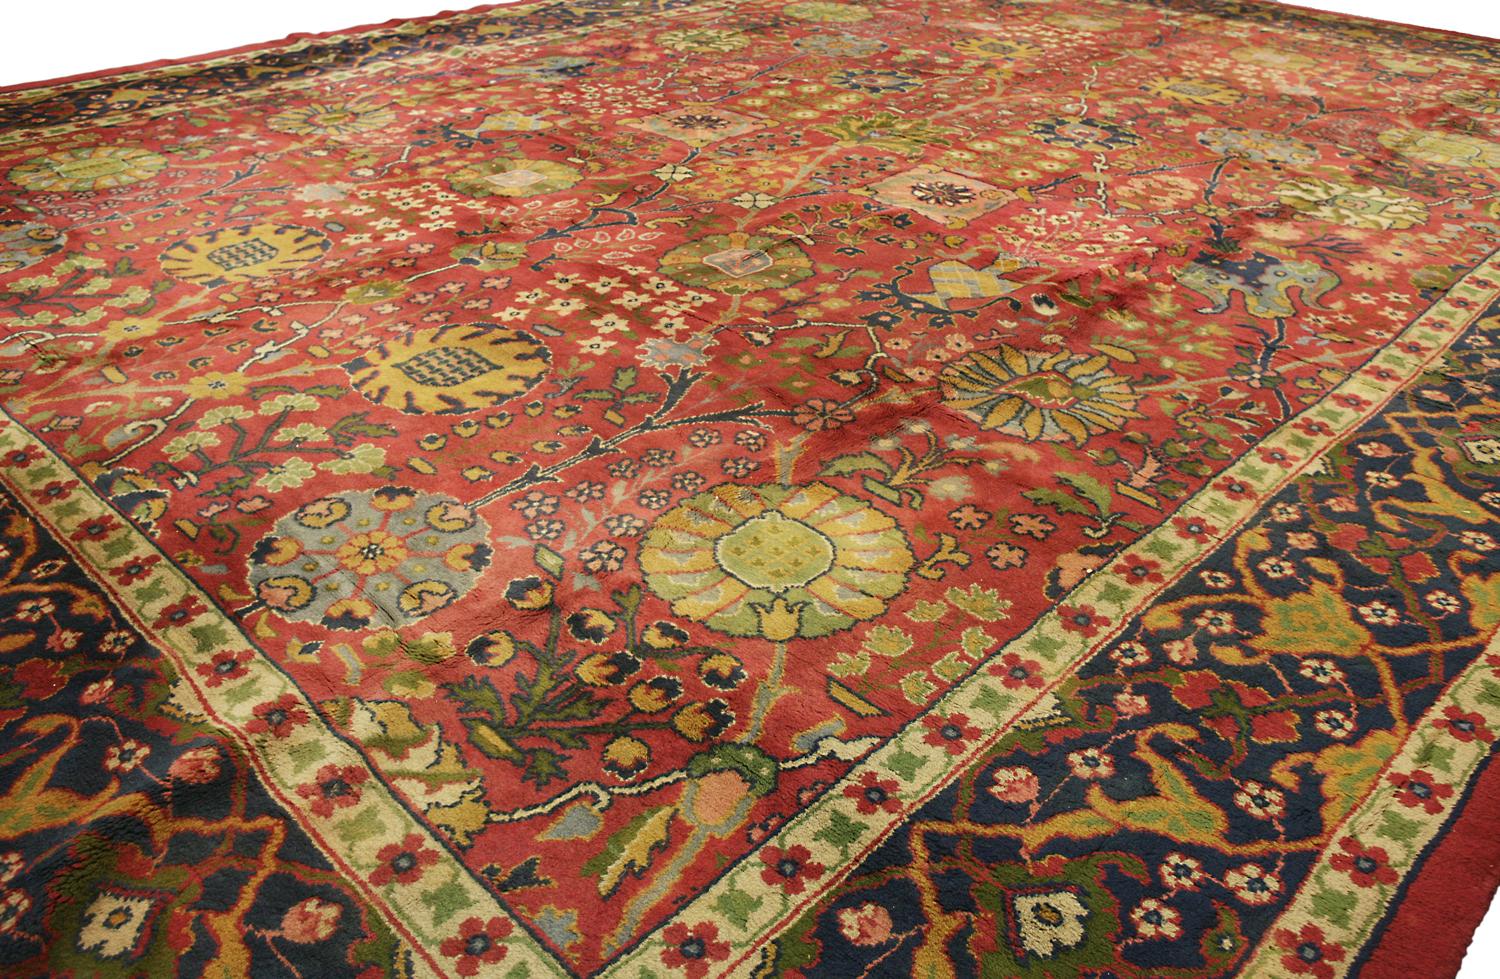 British Circa 1920 Oversized Antique English Wool Donegal Carpet, Red Field For Sale